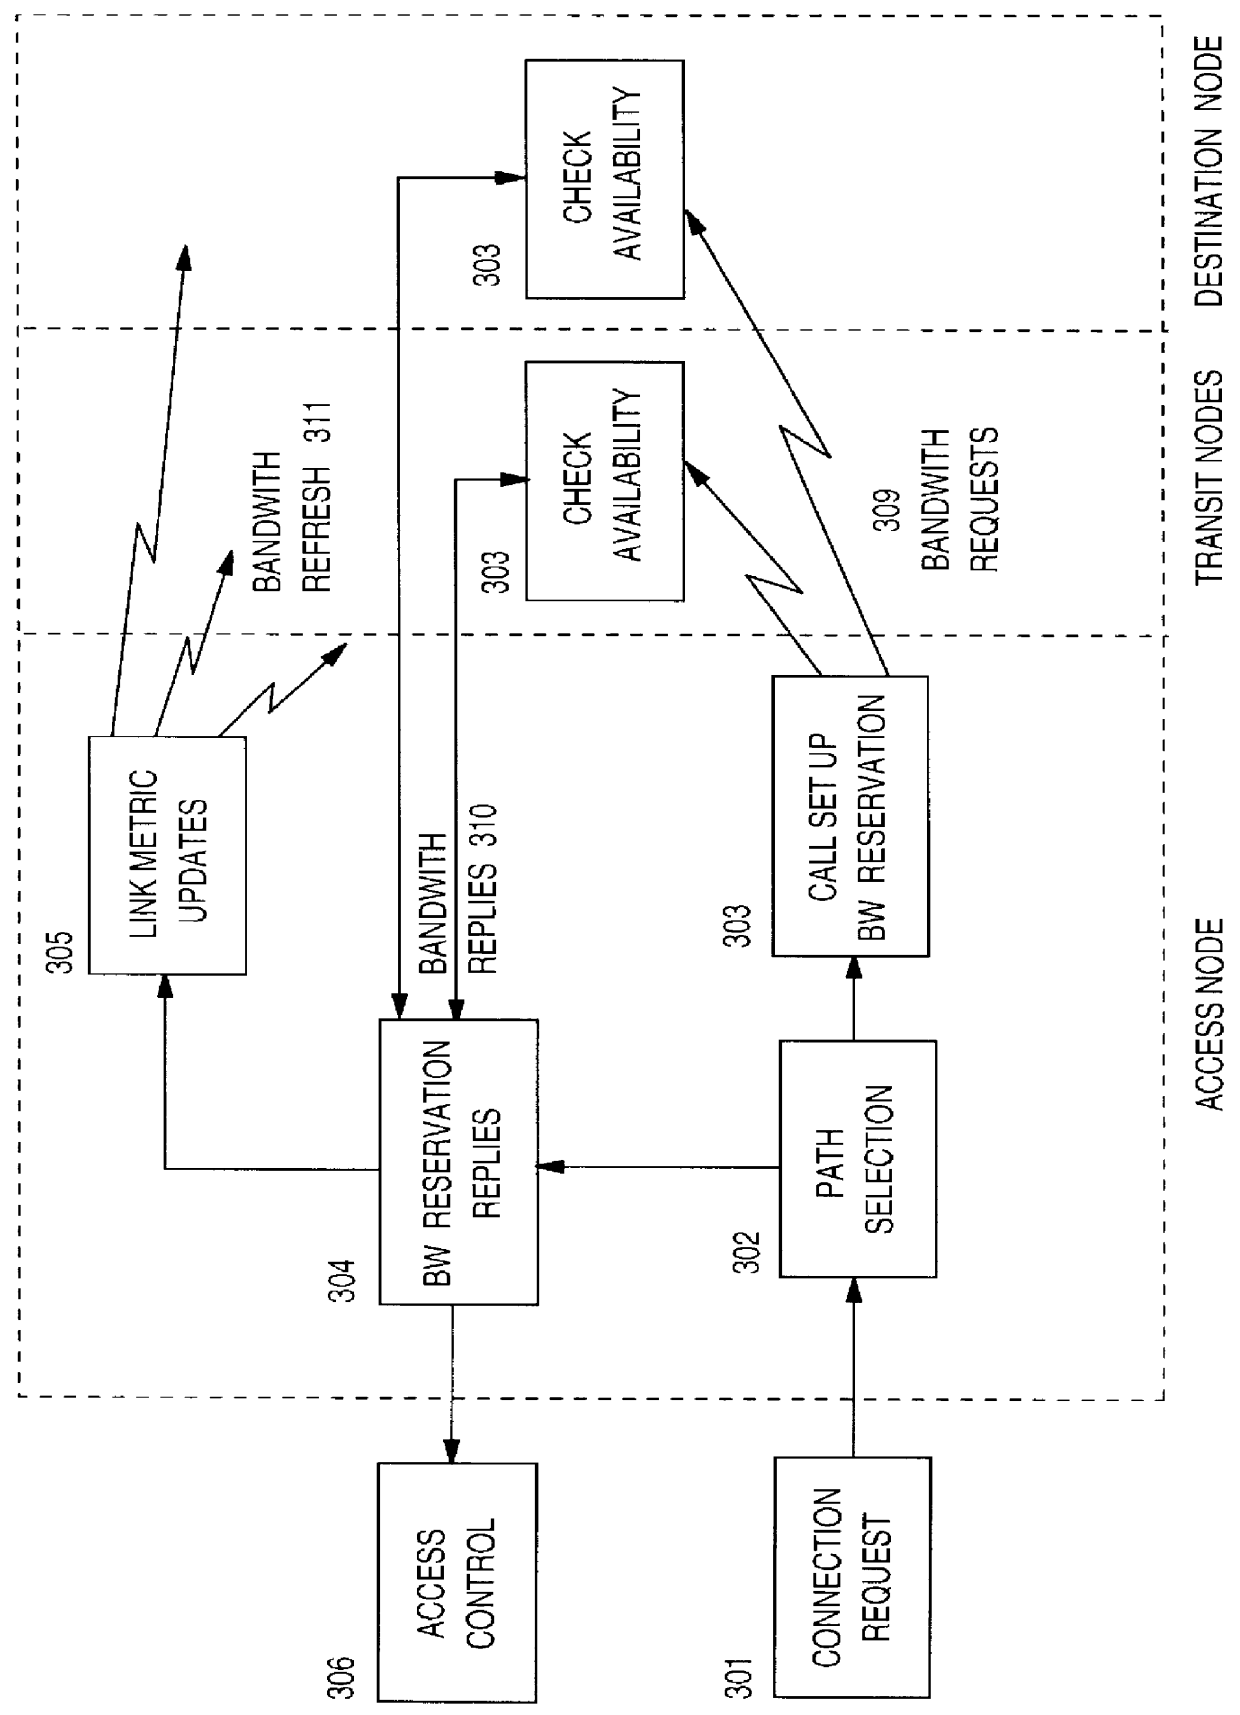 Method and system for optimizing the connection set up time in high speed communication networks for recovering from network failure